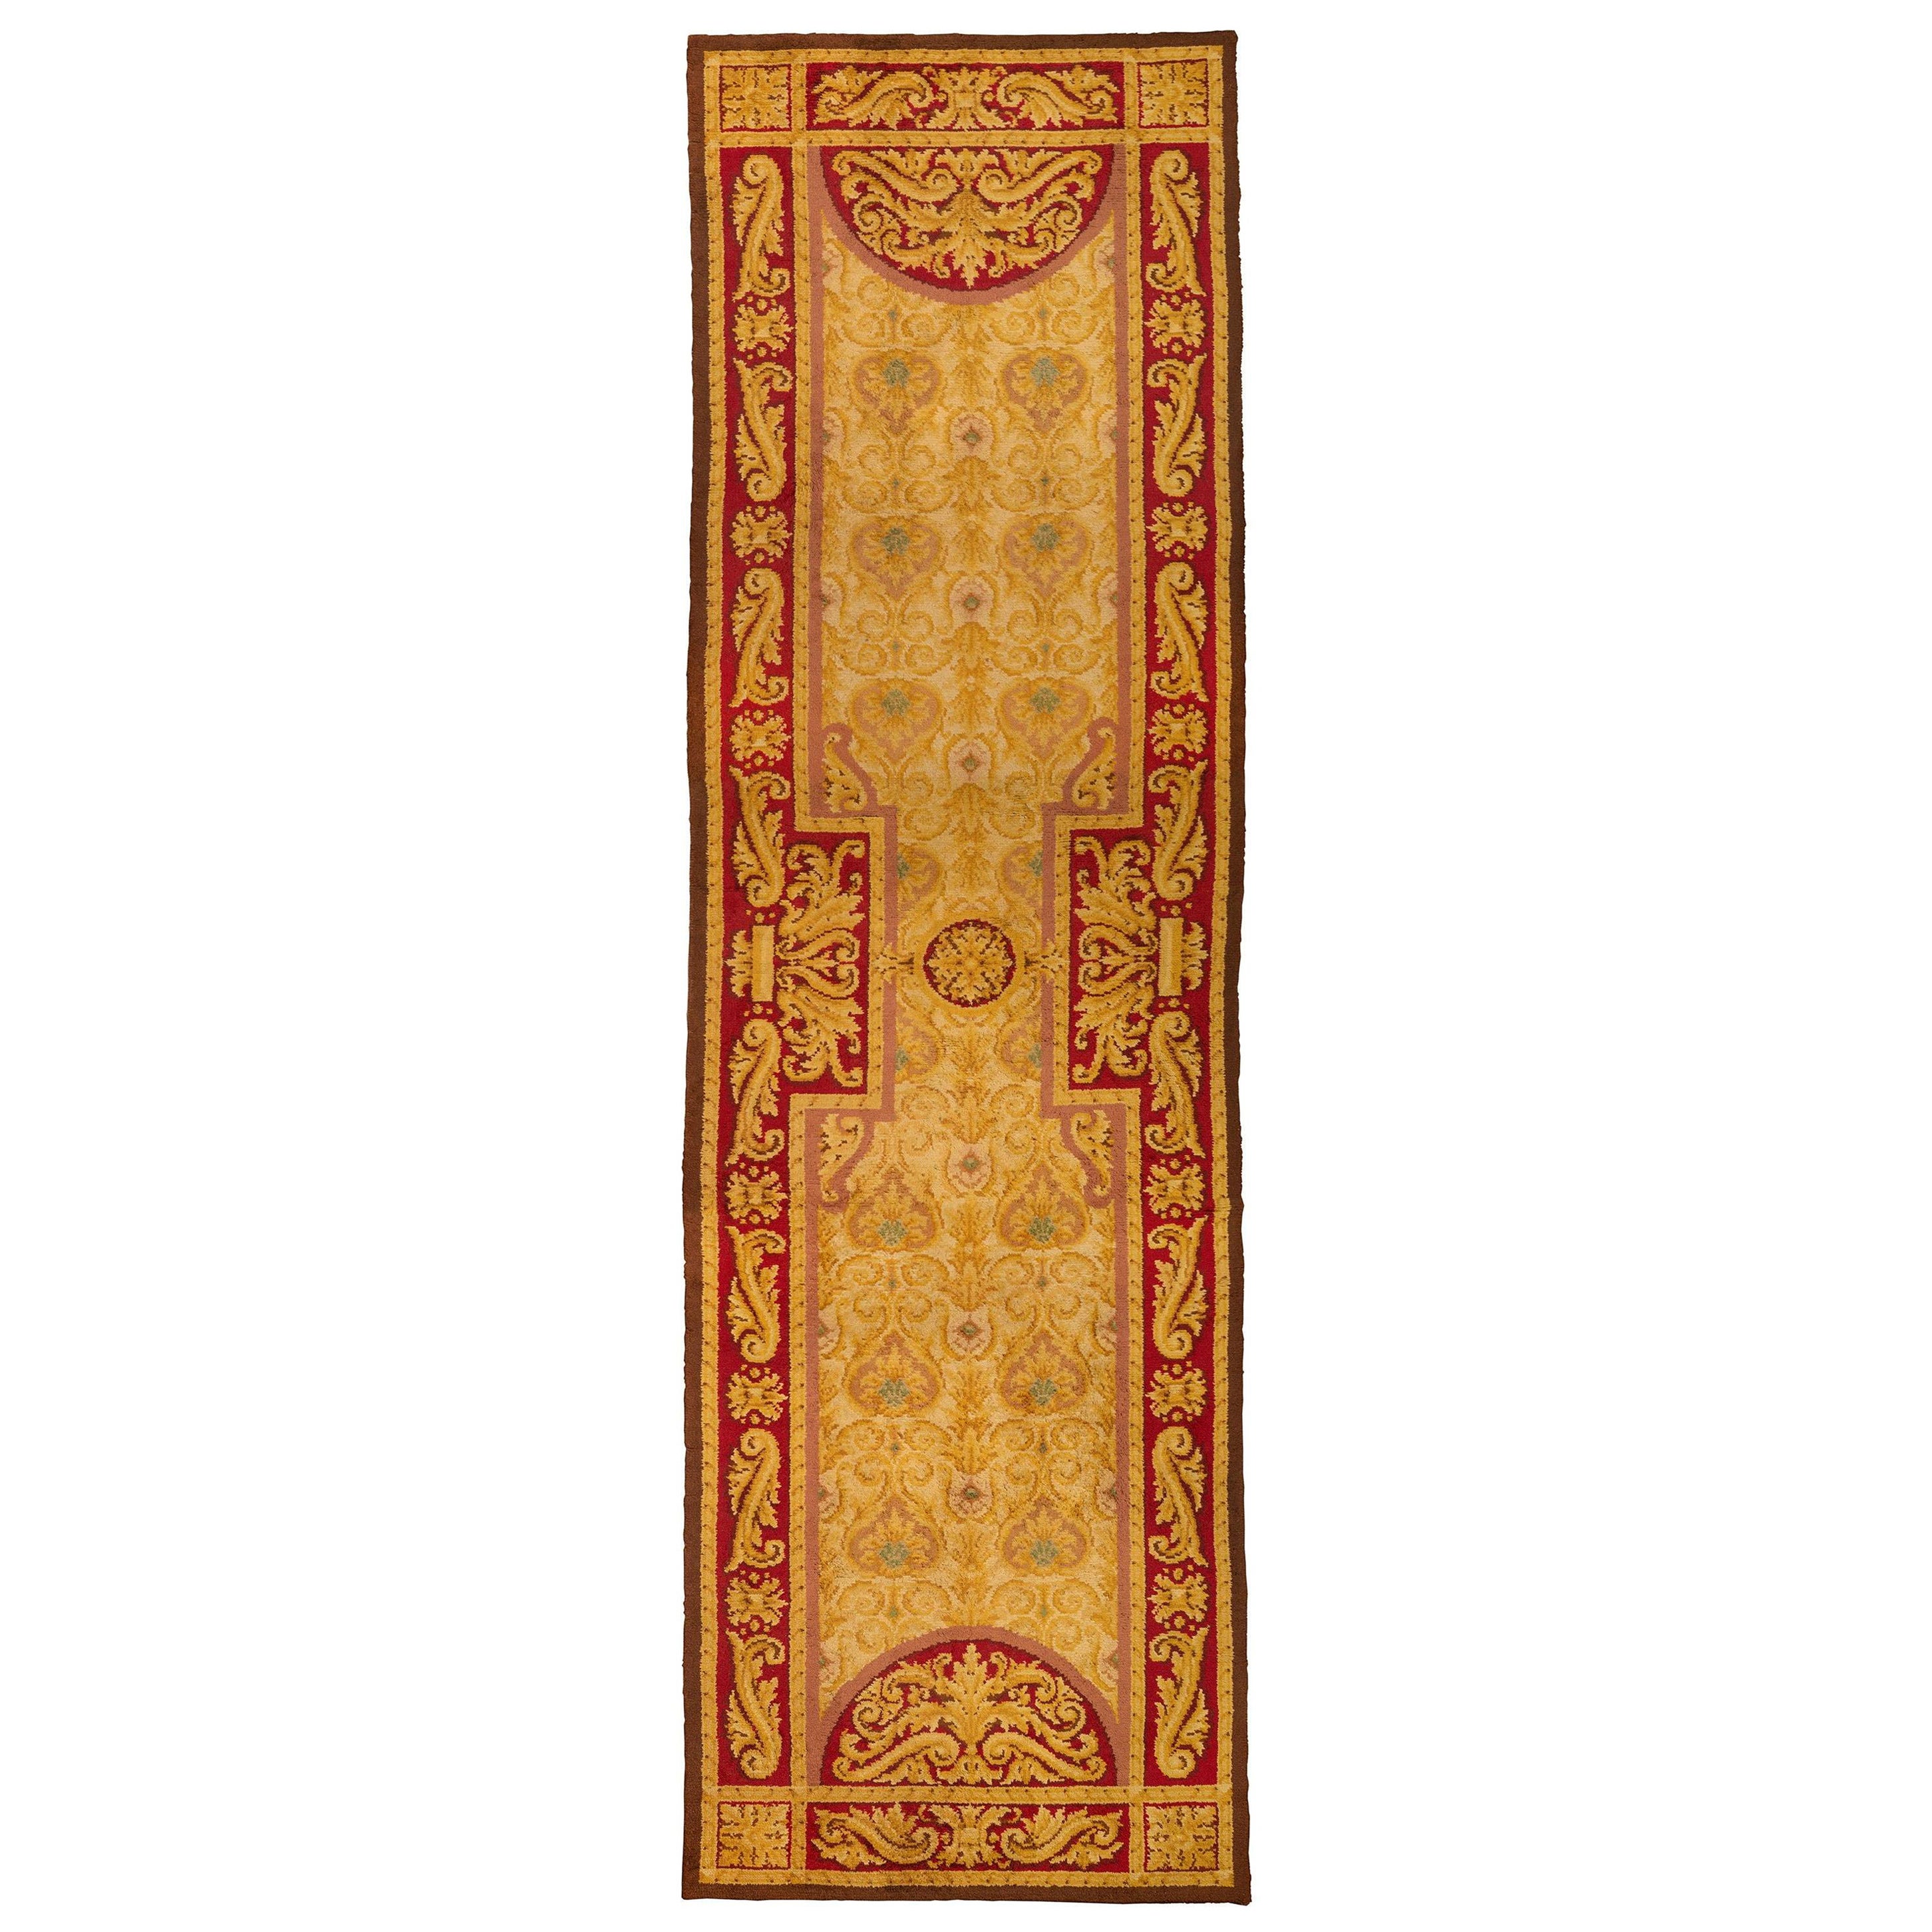 Large Colorful 19th Century Antique European Neoclassical Hallway, Runner Carpet For Sale